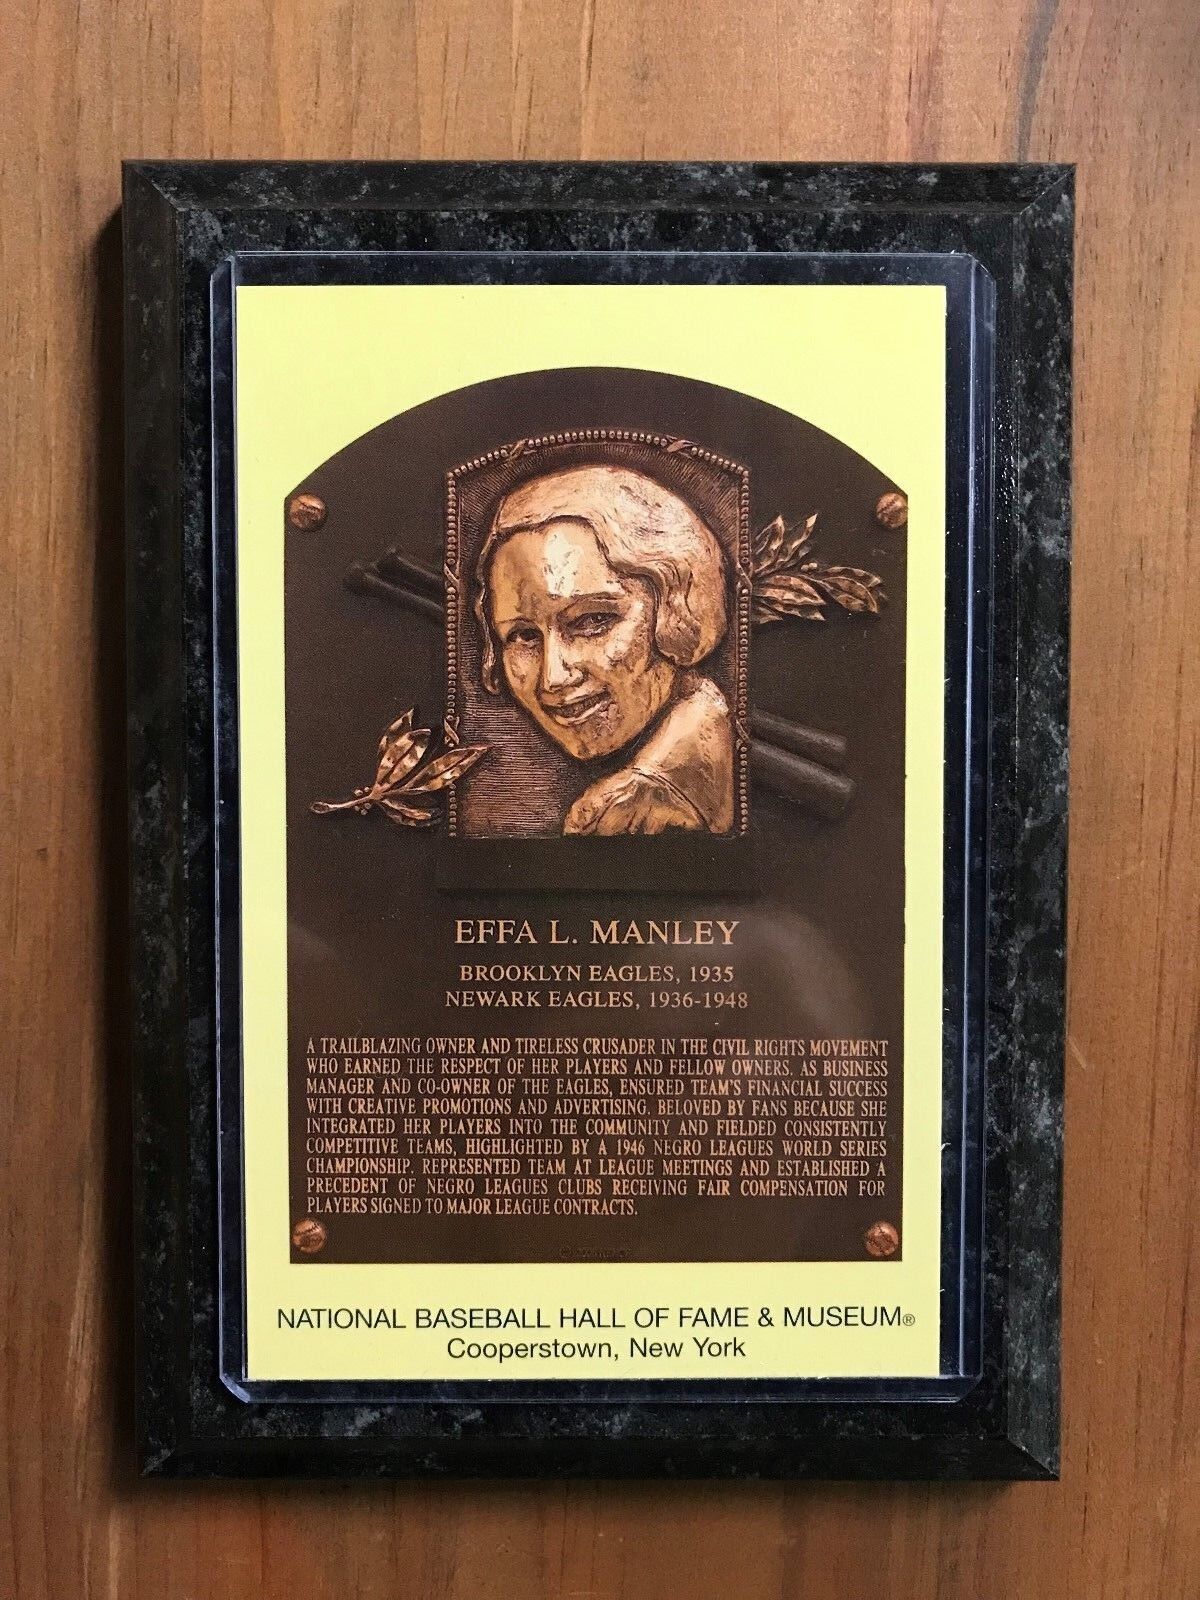 Effa Manley - Baseball Hall of Fame Induction - Ready to Hang Wall Plaque